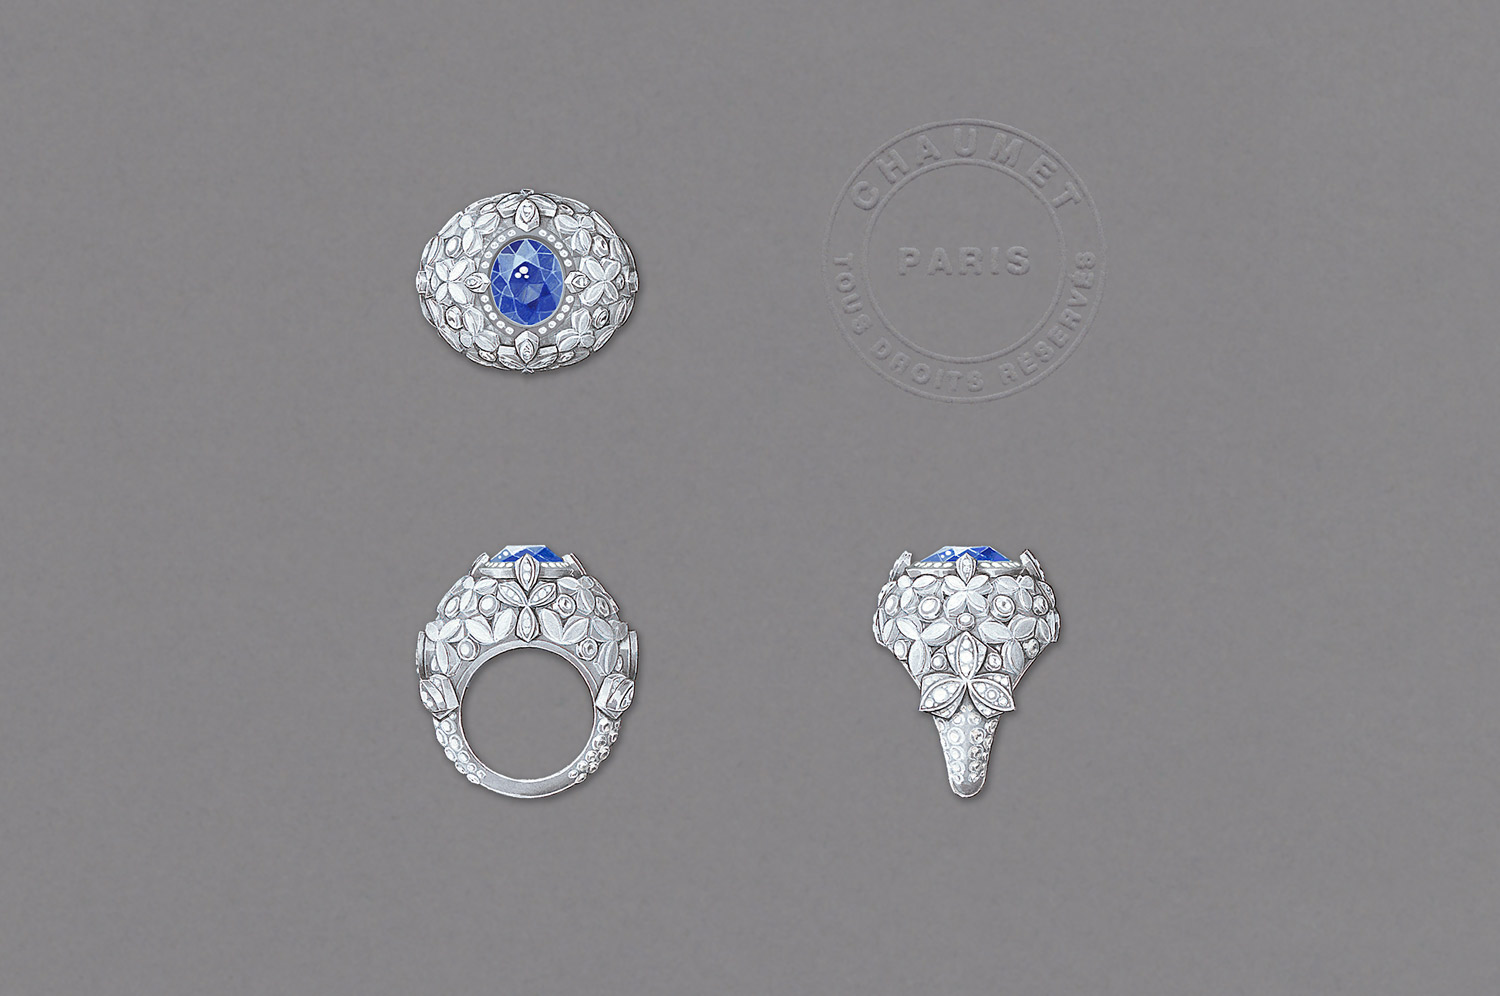 Chaumet ‘Promenades Imperiales’ collection ring in 18k white gold, set with a 5.08 ct Ceylon sapphire and diamonds